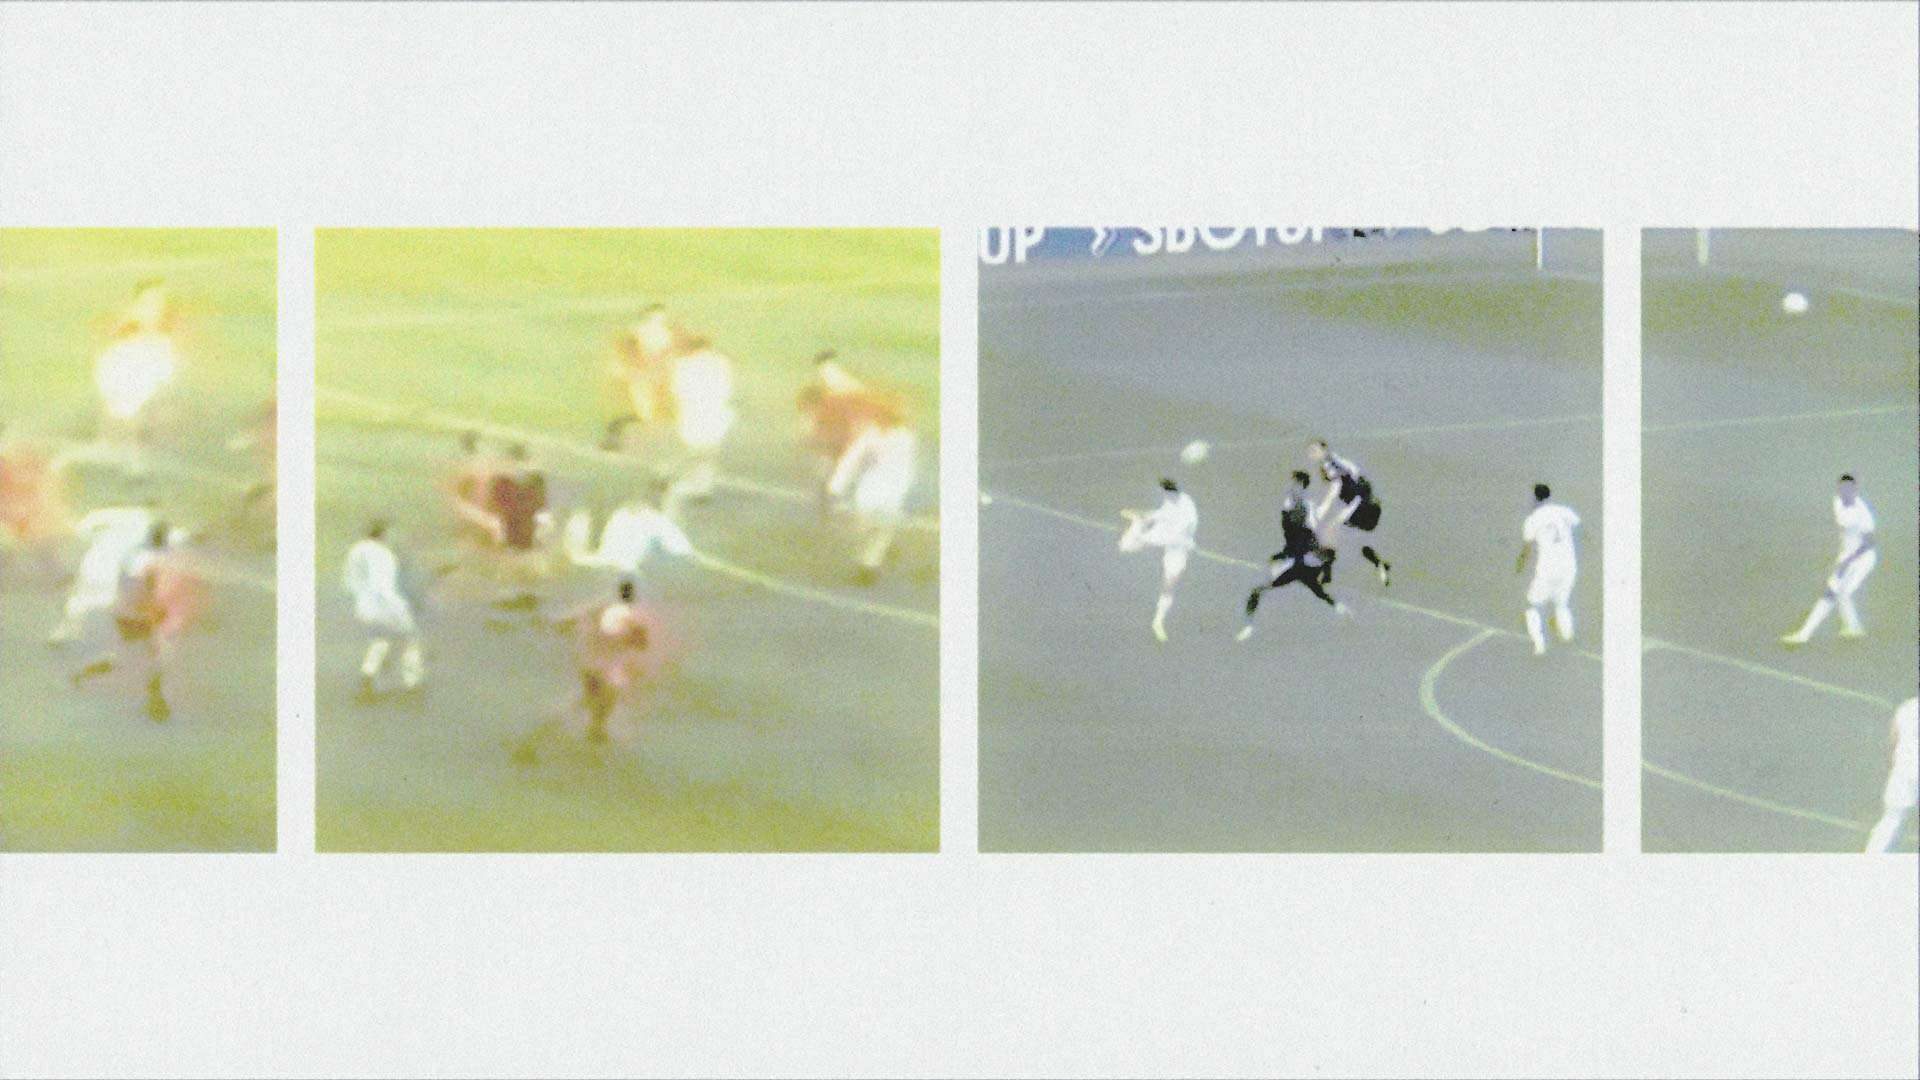 Four stills from two videos side by side — Billy Bremner backheeling the ball over the defence in 1972, and Brenden Aaronson trying the same fifty years later